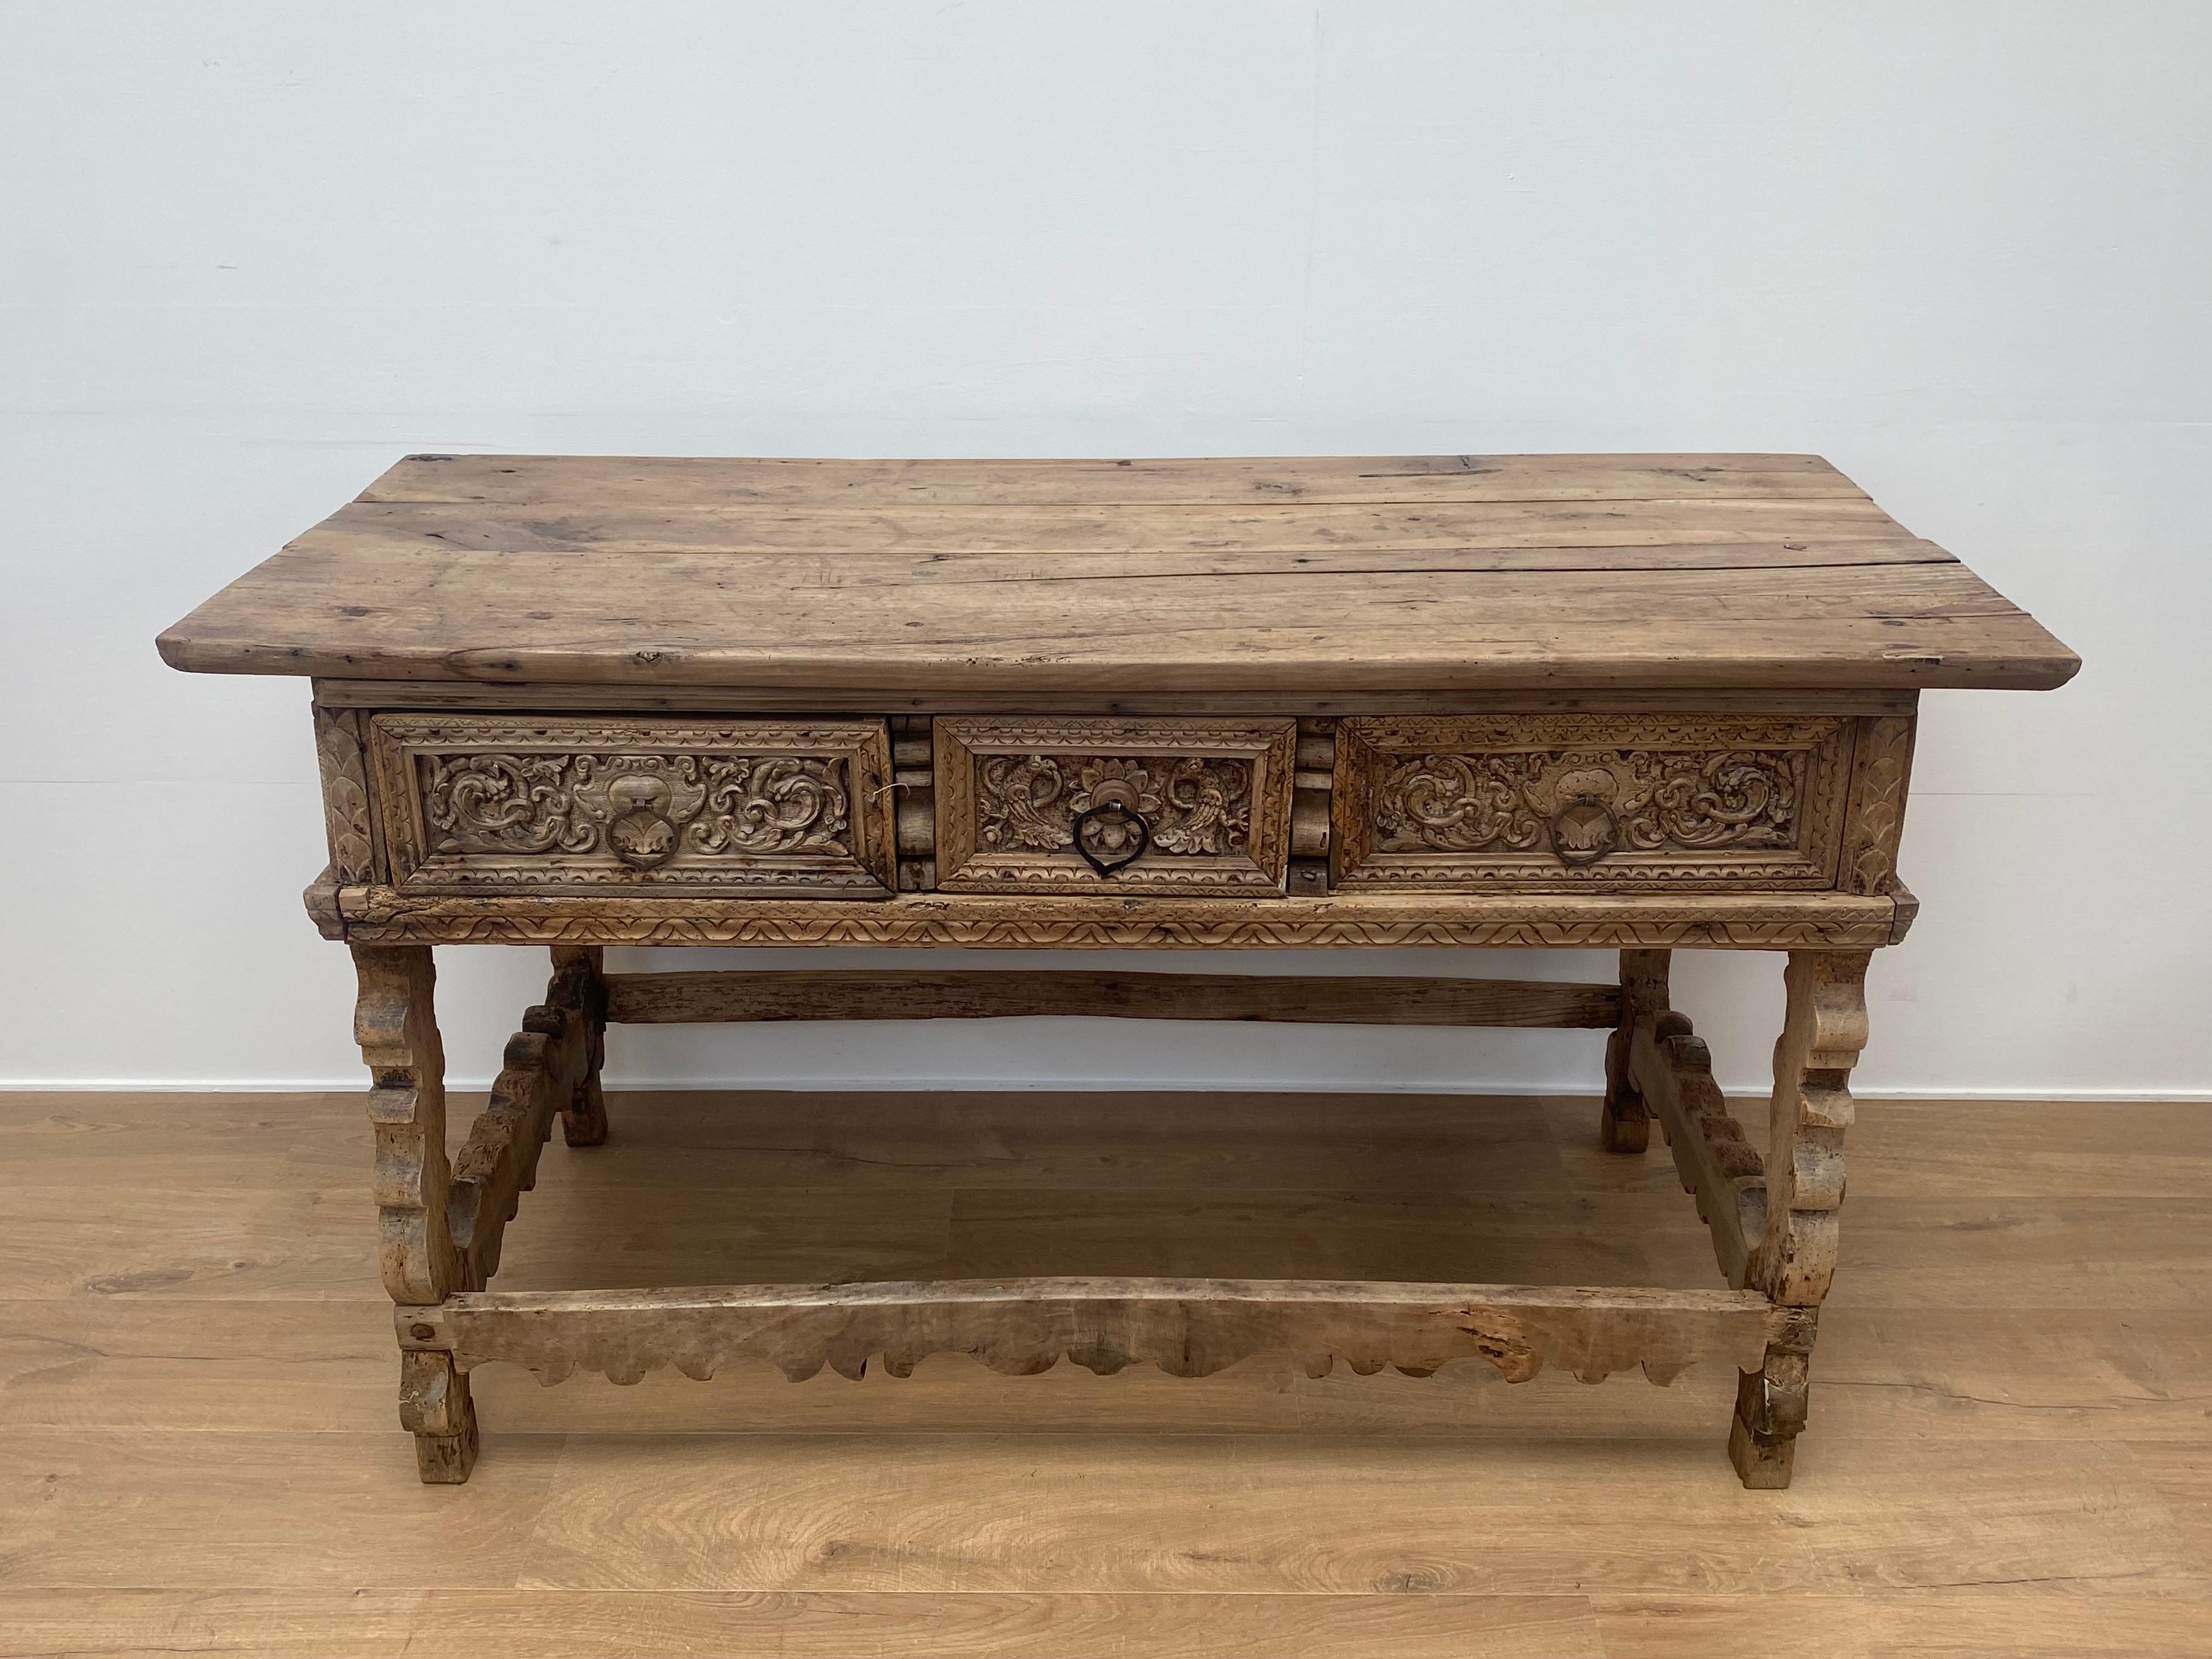 Beautiful Italian Dresser with 3 drawers from Tuscany, late 17 th Century,
the dresser has has a beautiful shine and patina of the bleached Walnut,
the drawers have a fine and beautiful carving,
very decorative piece